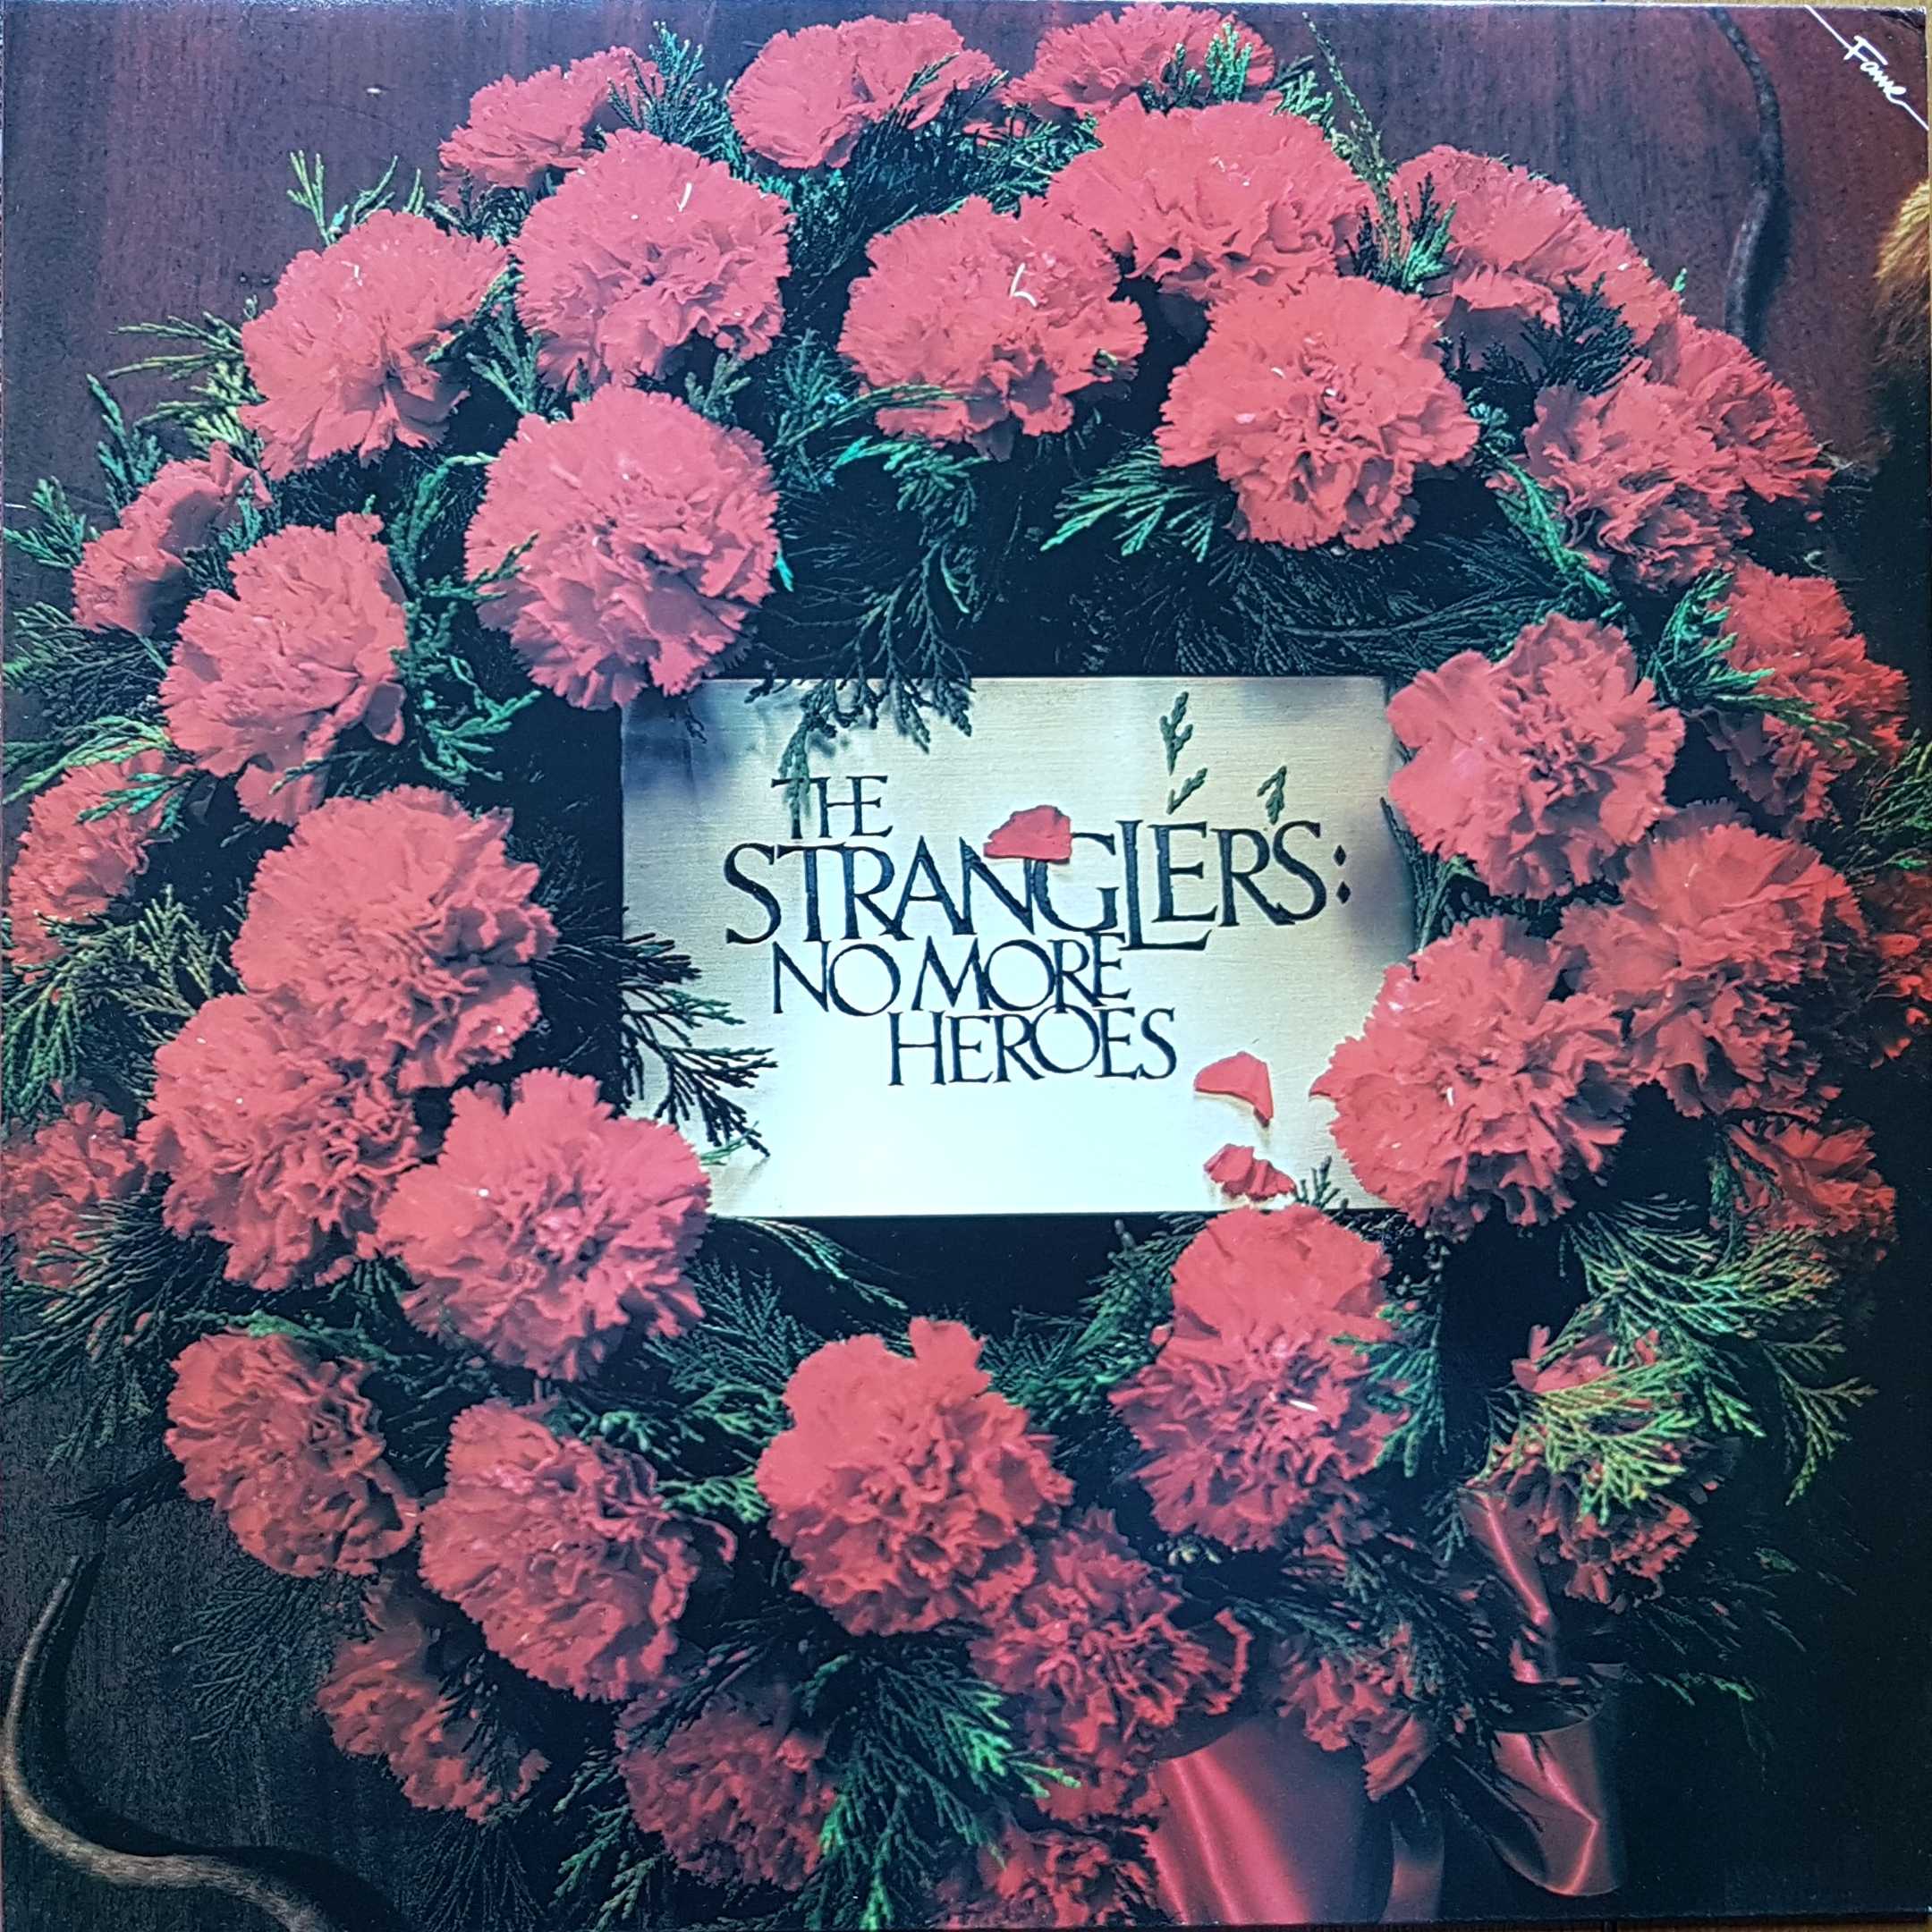 Picture of No more heroes by artist The Stranglers  from The Stranglers albums